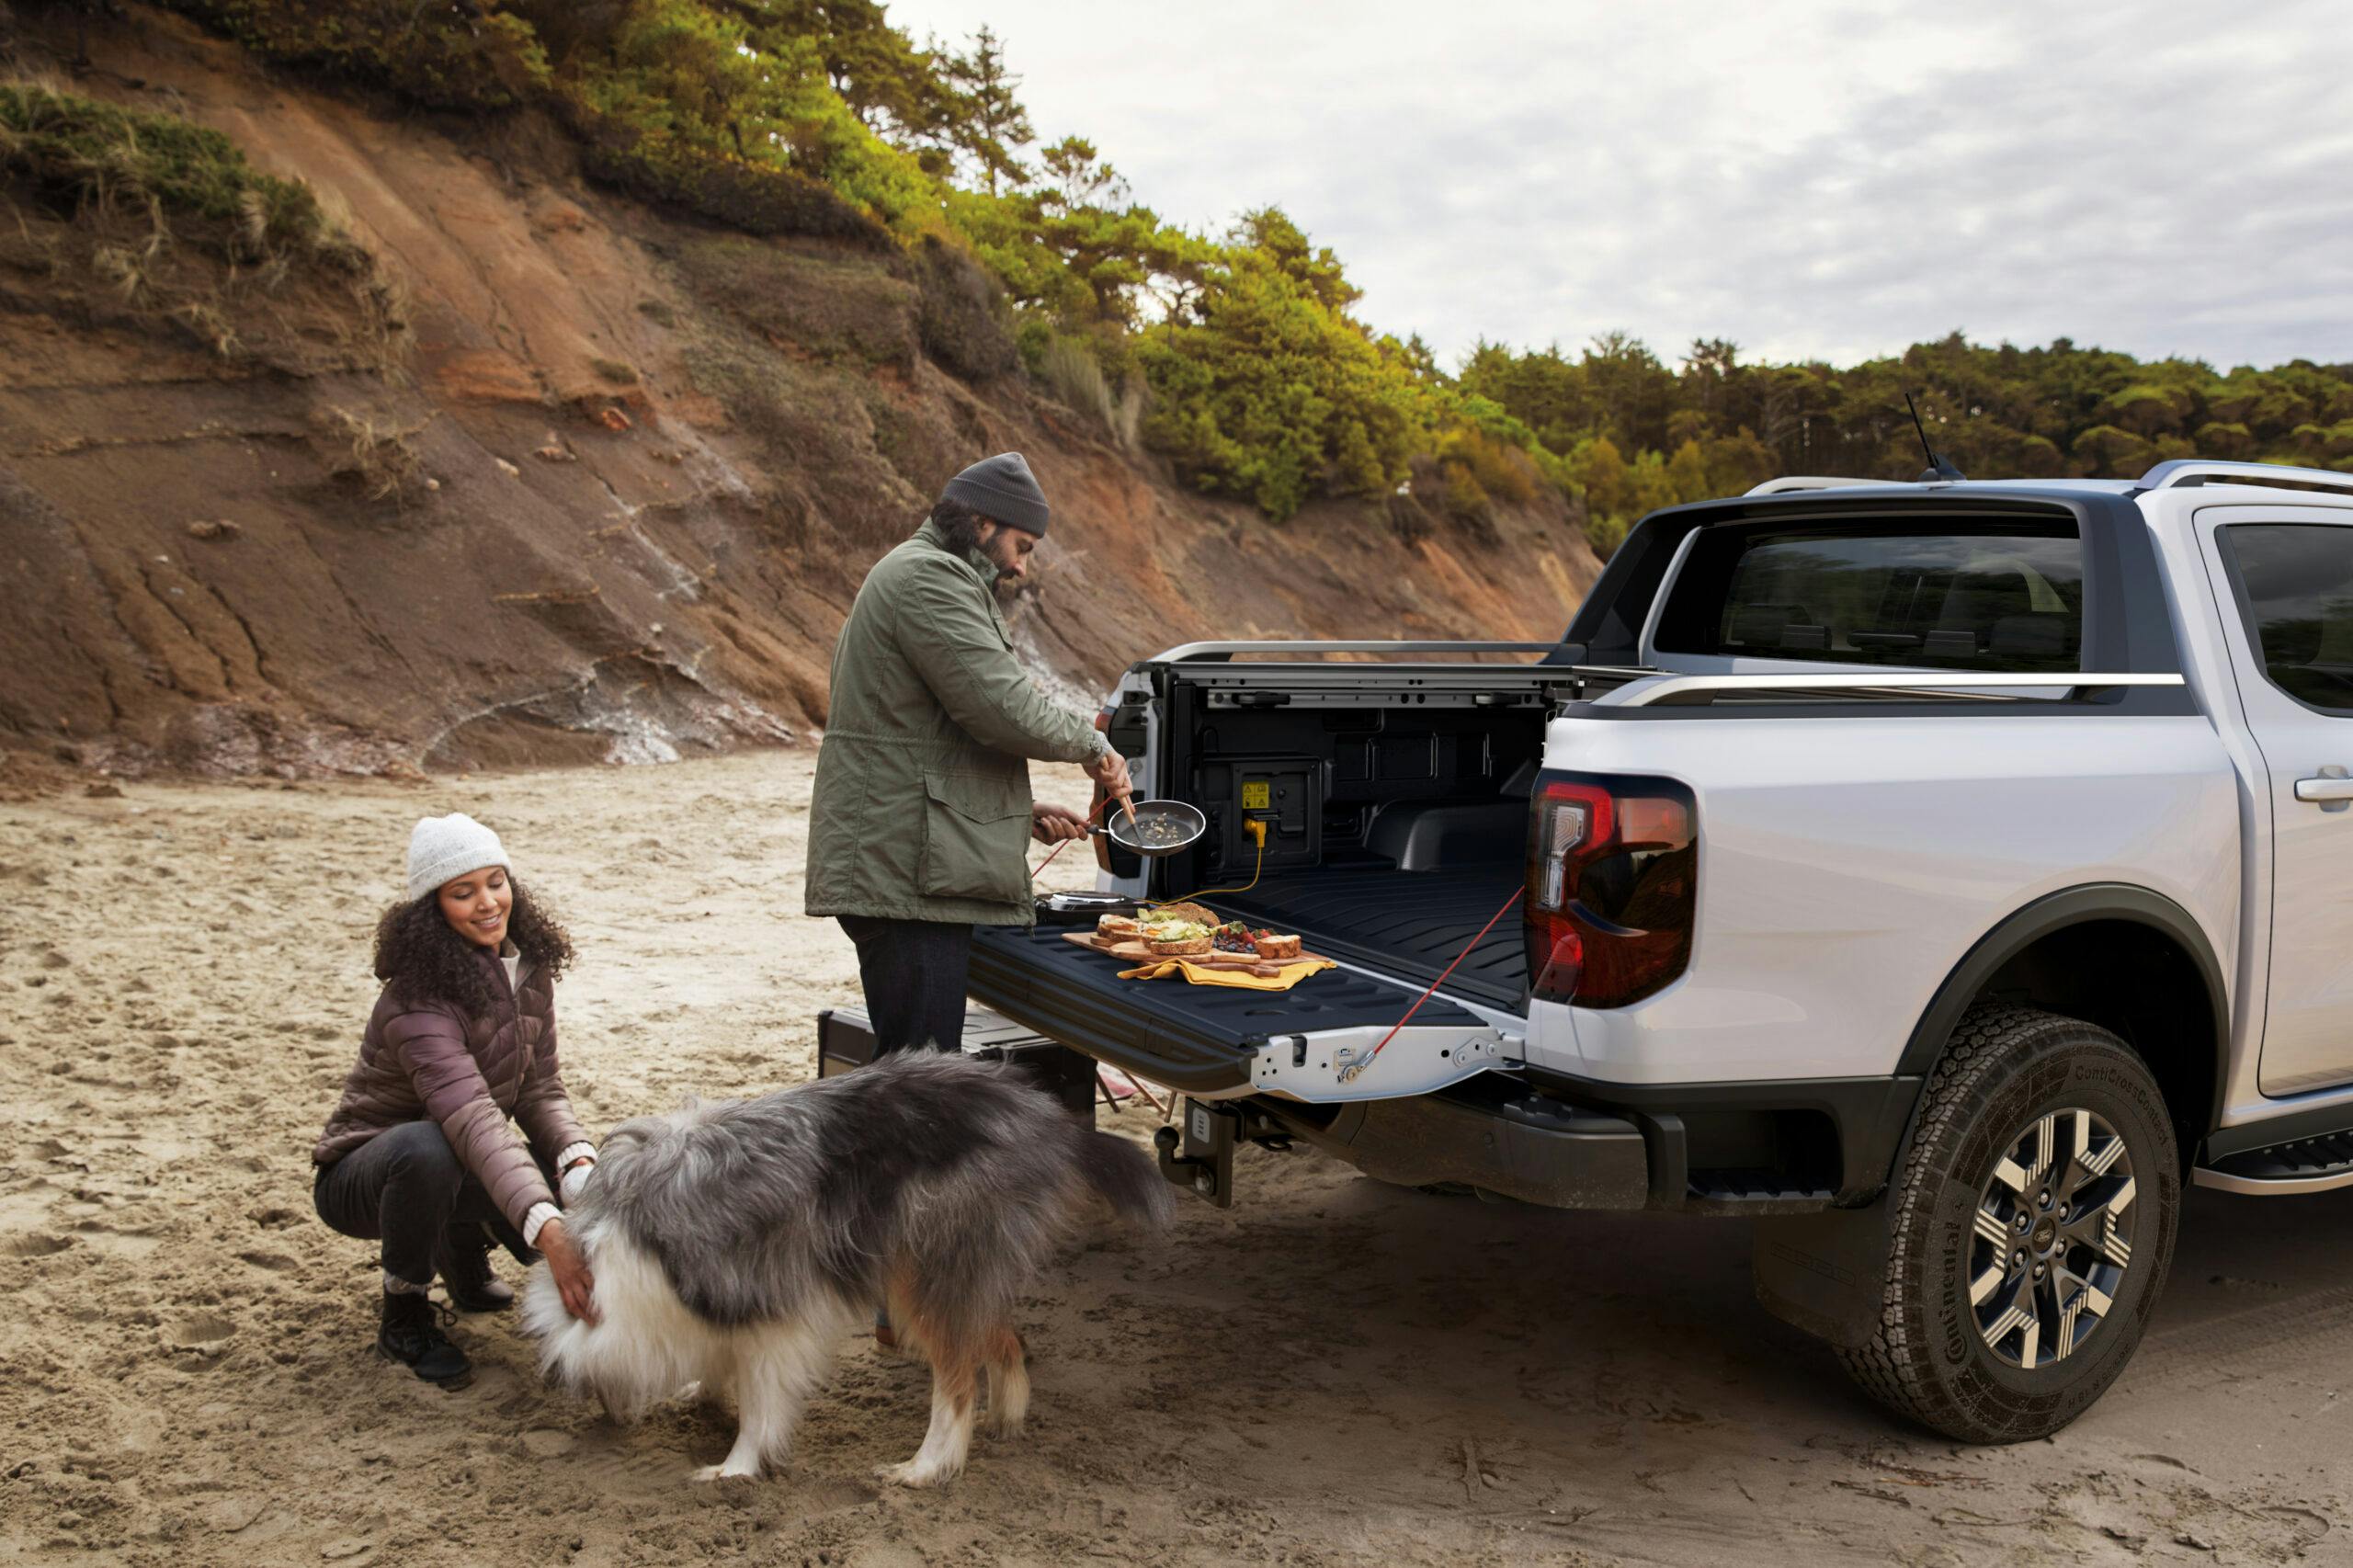 Ford Ranger Plug-in Hybrid tailgate camp cook